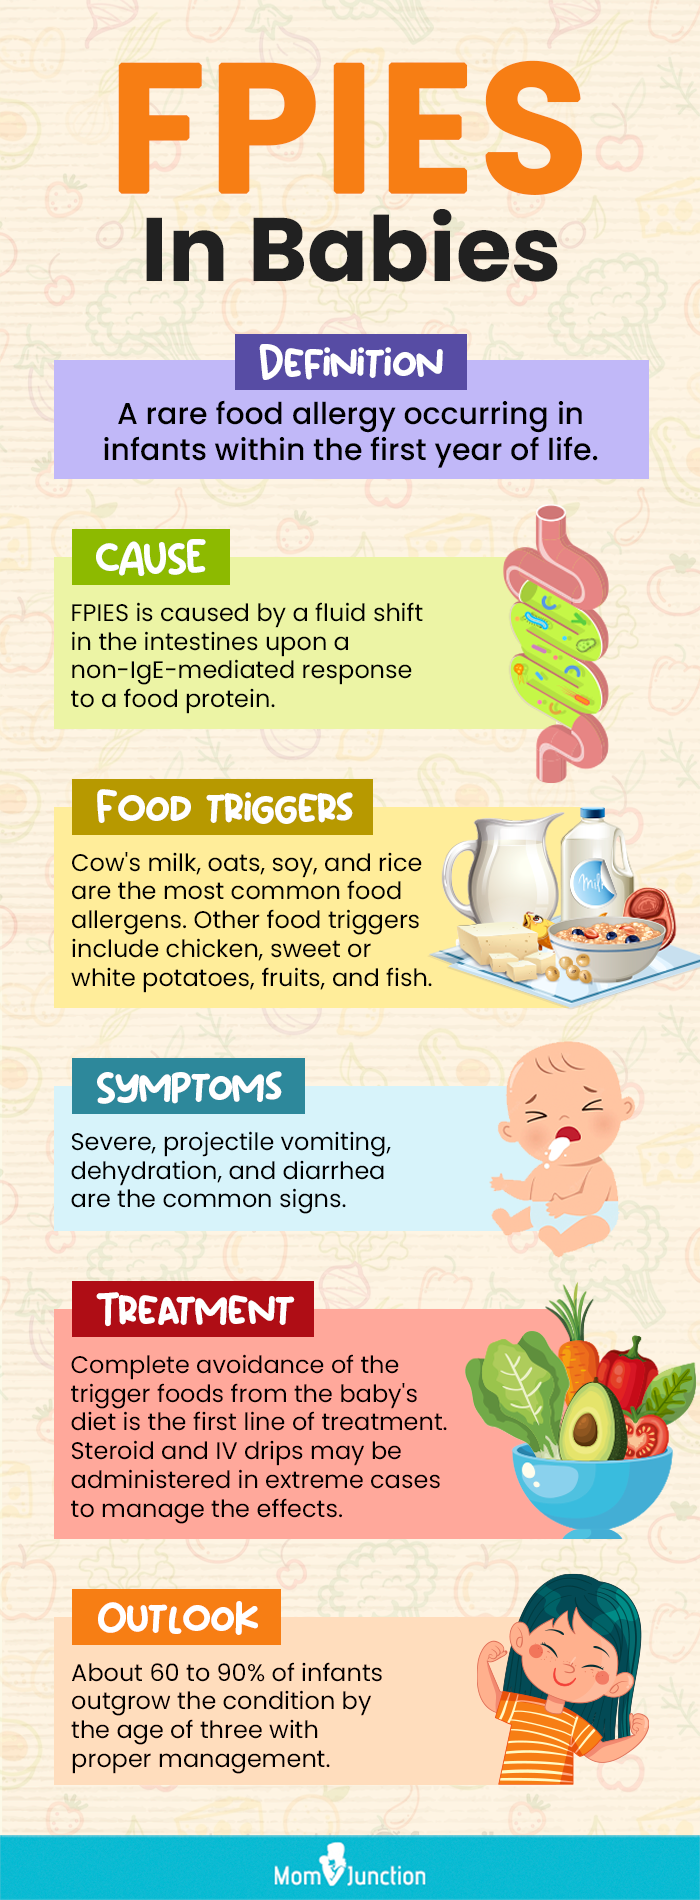 fpies in babies (infographic)